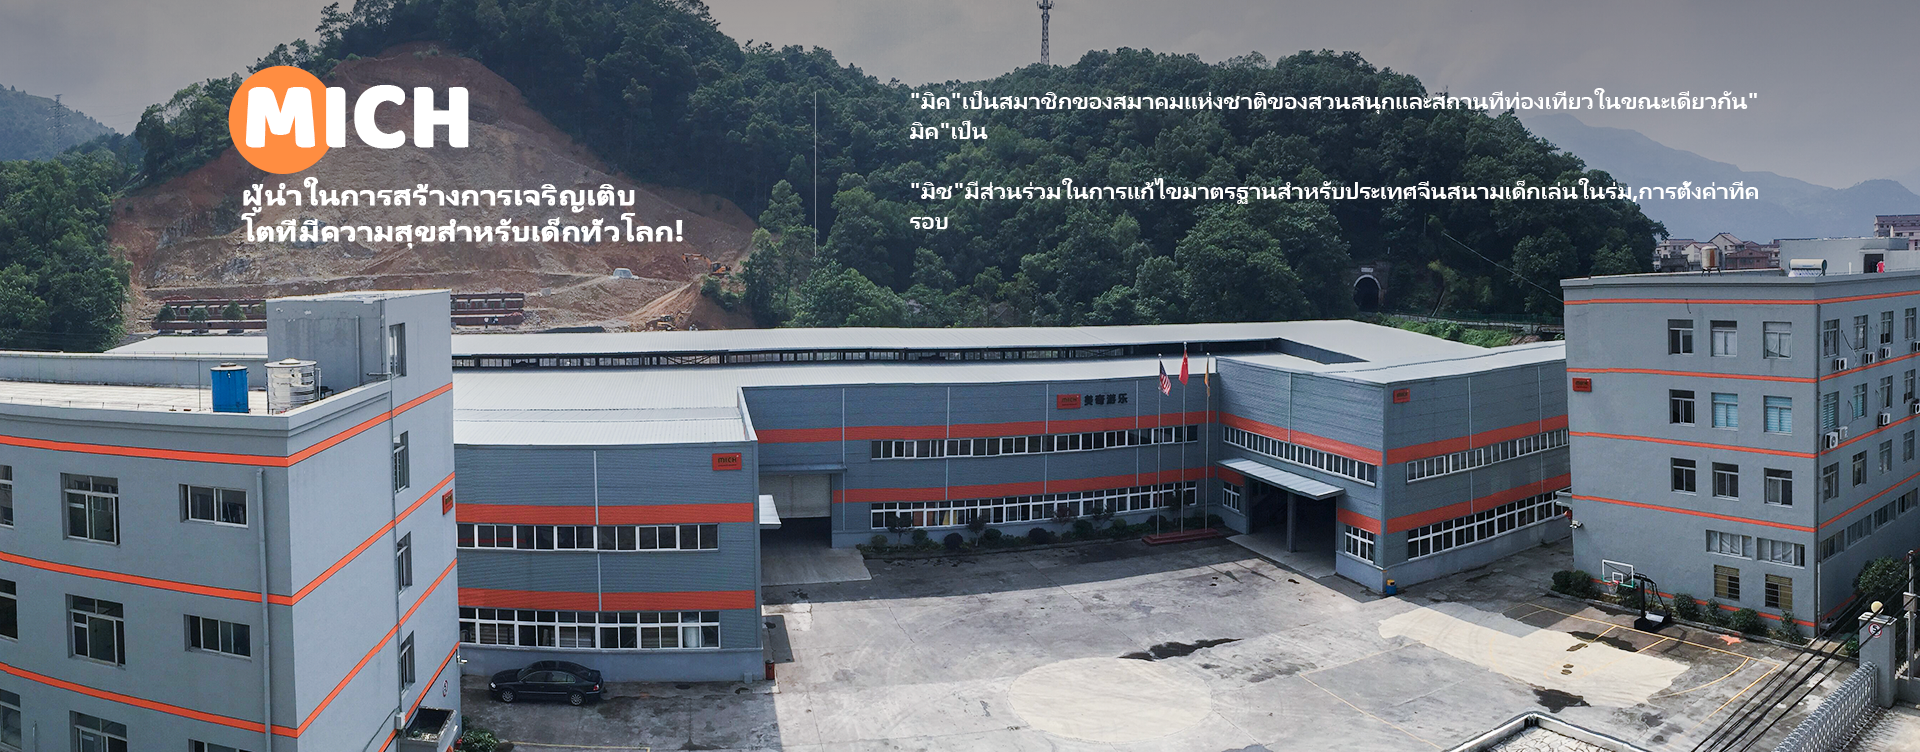 Exterior view of the playground supplier company, a leader to create happy growth for global children, showcasing its commitment to providing quality play equipment.